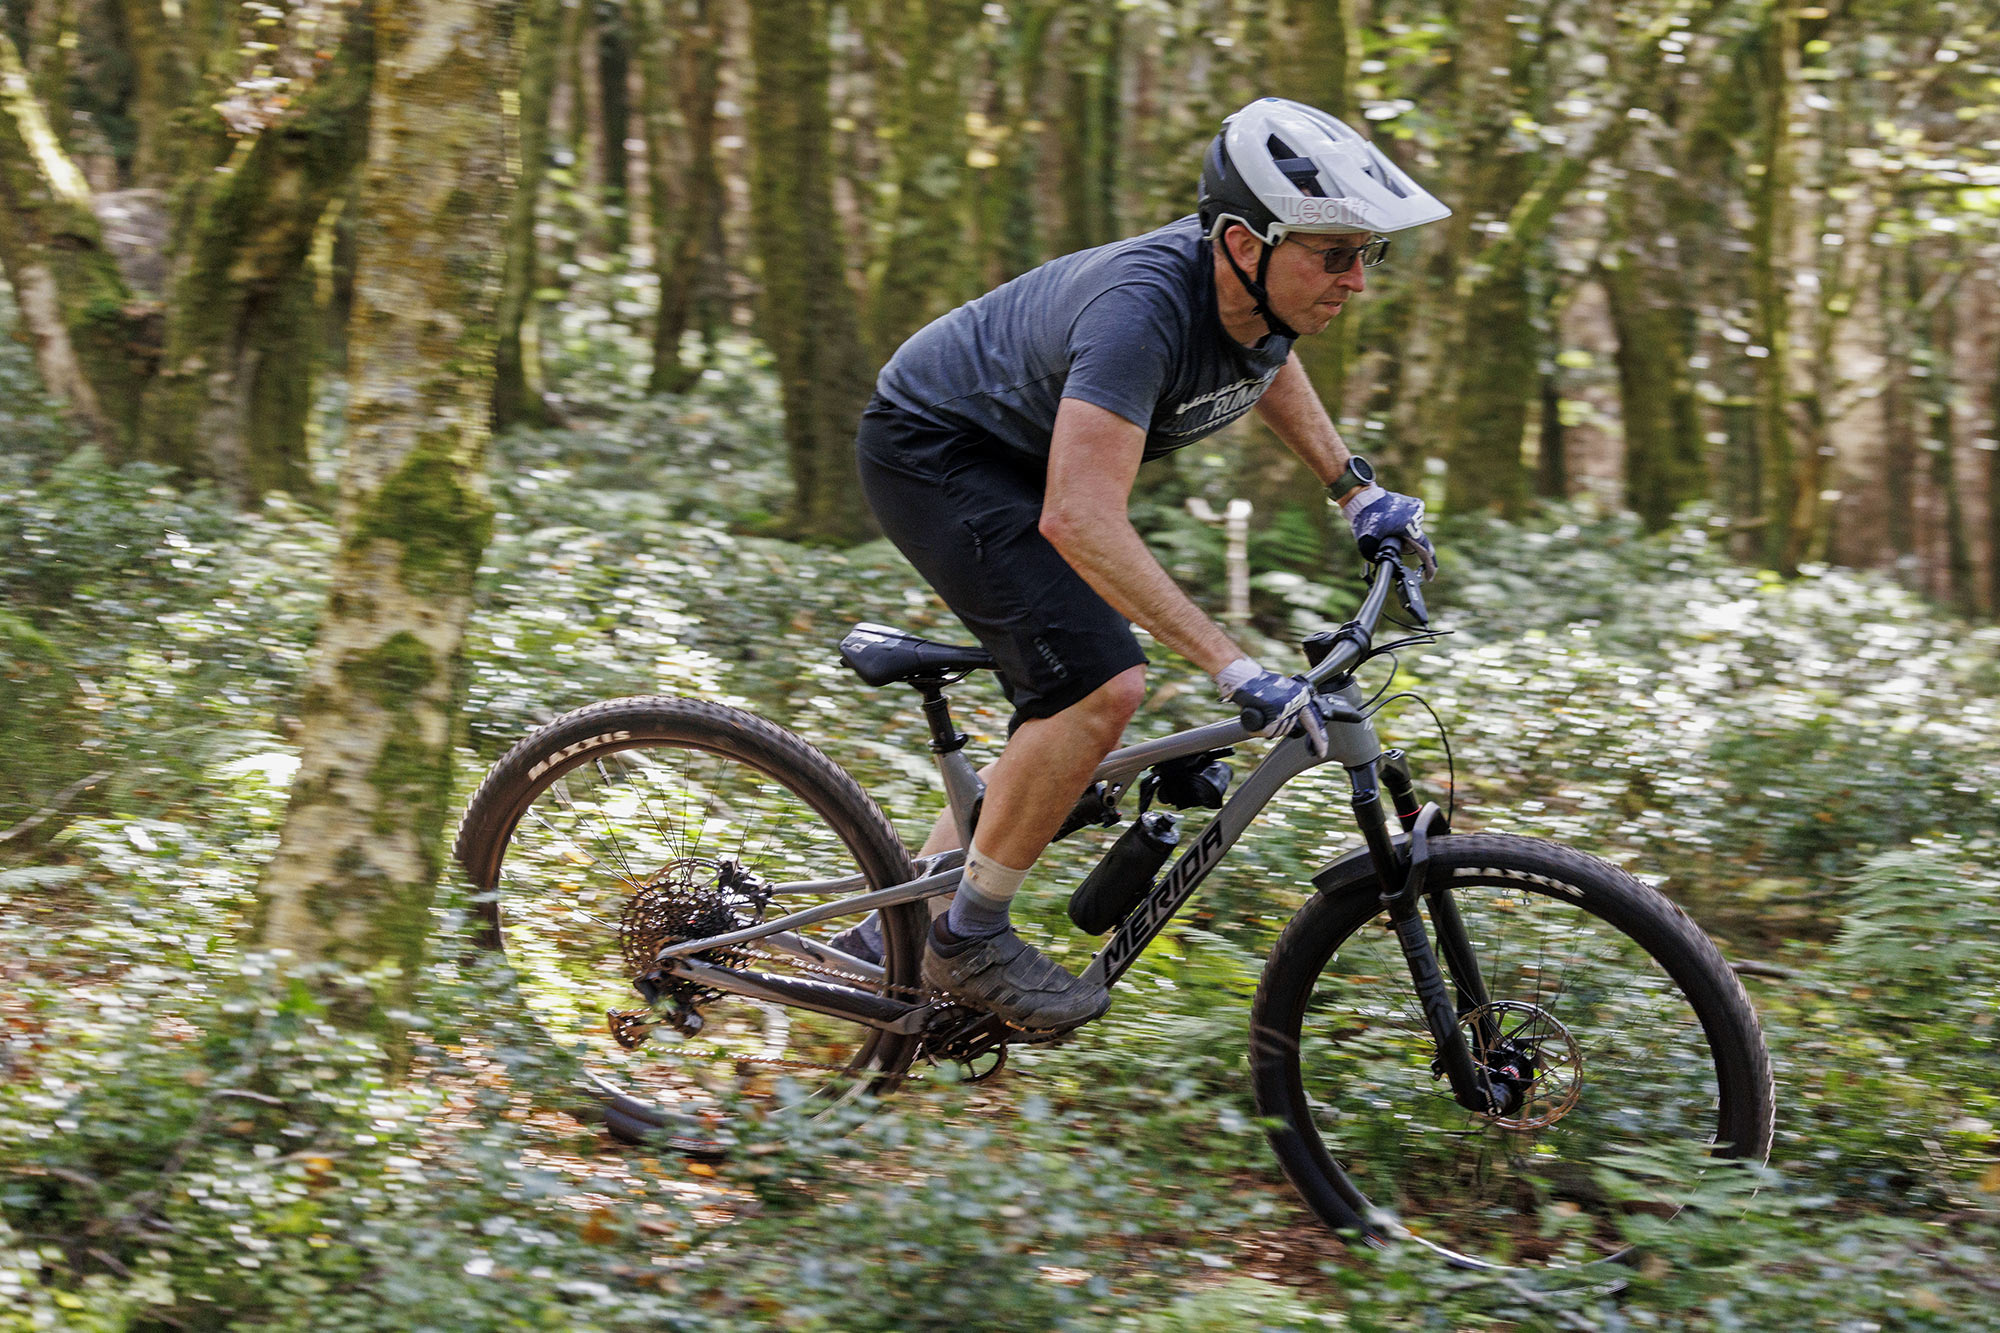 Merida One-Twenty Review, affordable 130mm alloy trail mountain bike, photo by Paul Box, riding